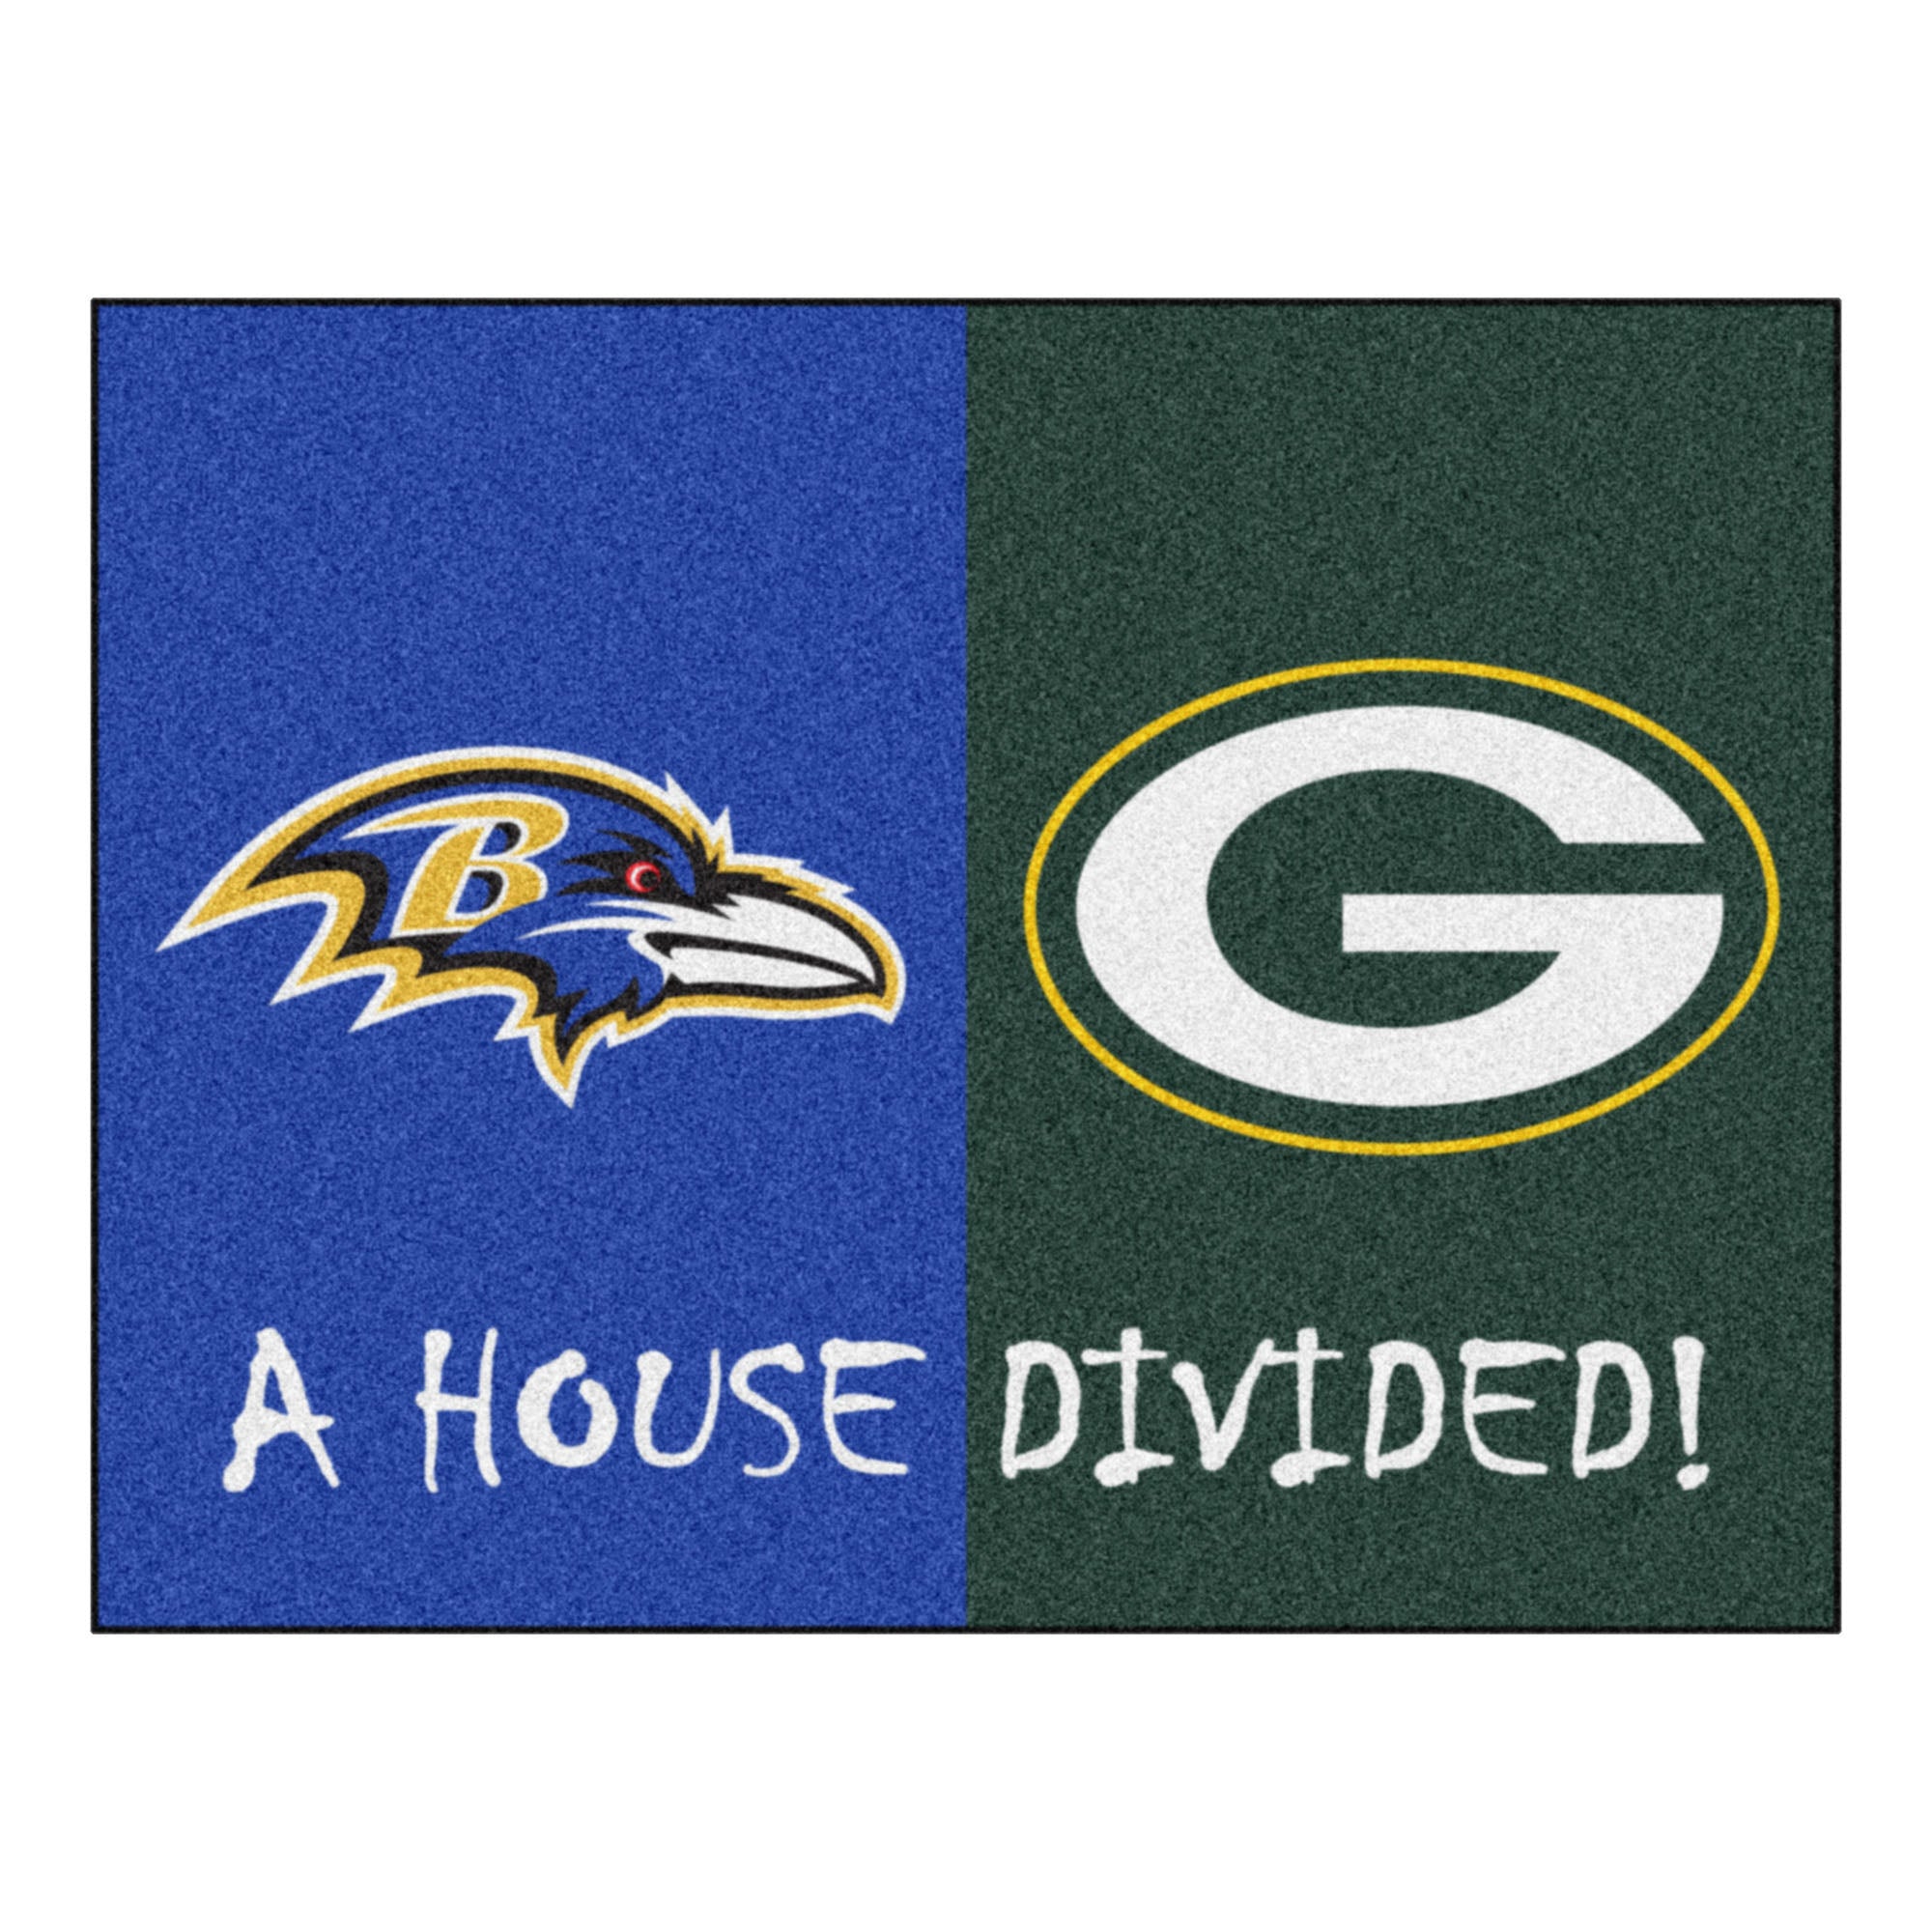 NFL House Divided - Ravens / Packers House Divided Mat